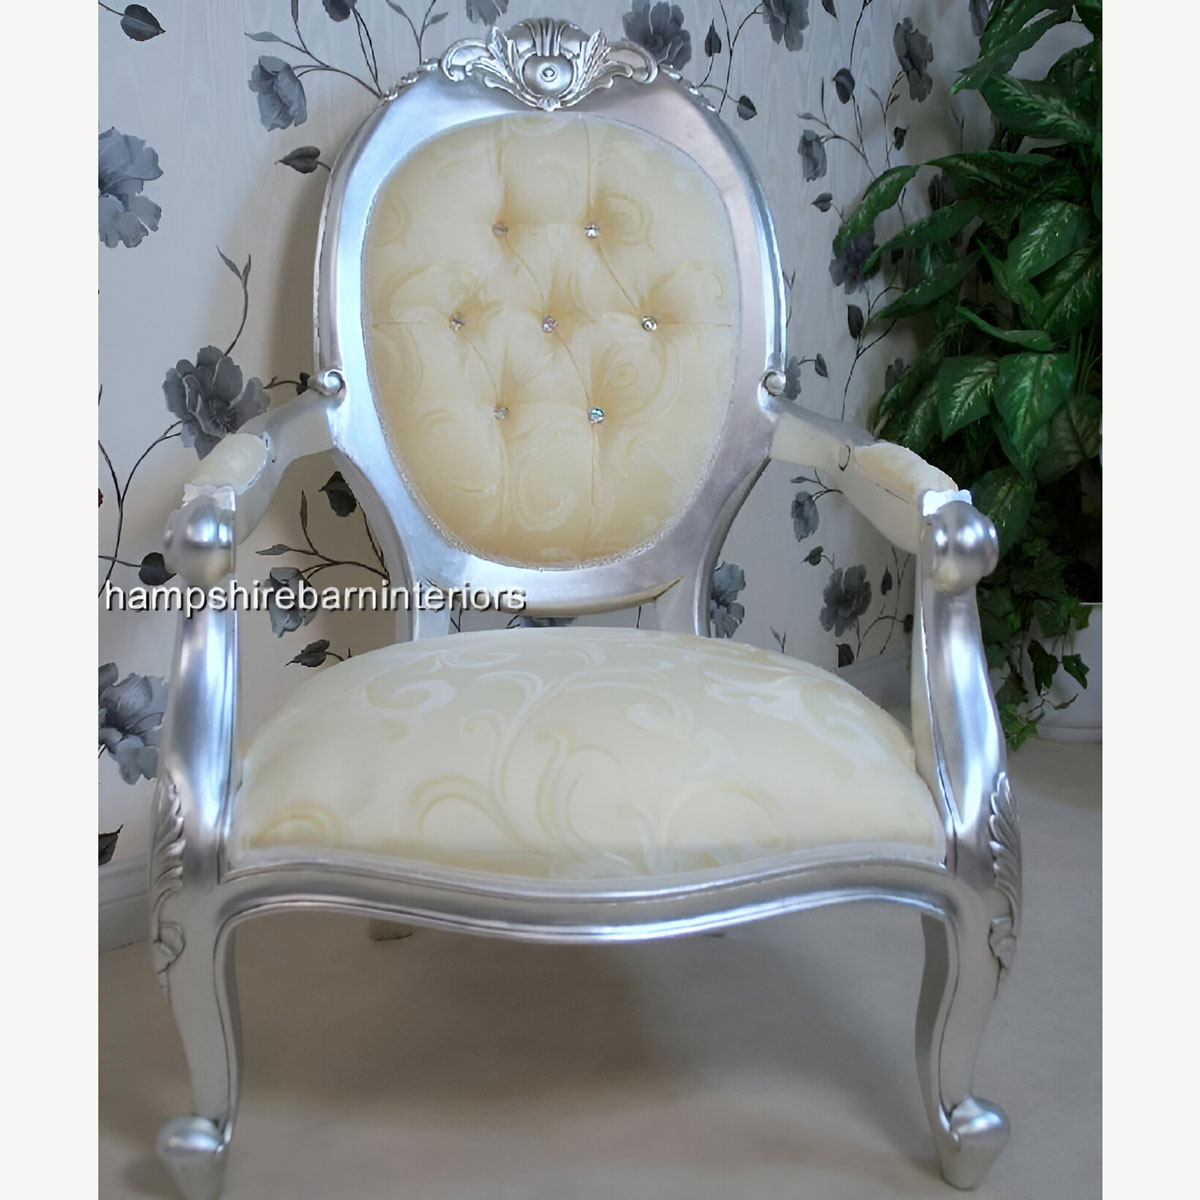 A Chatsworth Arm Throne Chair In Silver Leaf Crystal Buttons And Cream Fabric 1 - Hampshire Barn Interiors - A Chatsworth Arm Throne Chair In Silver Leaf Crystal Buttons And Cream Fabric -